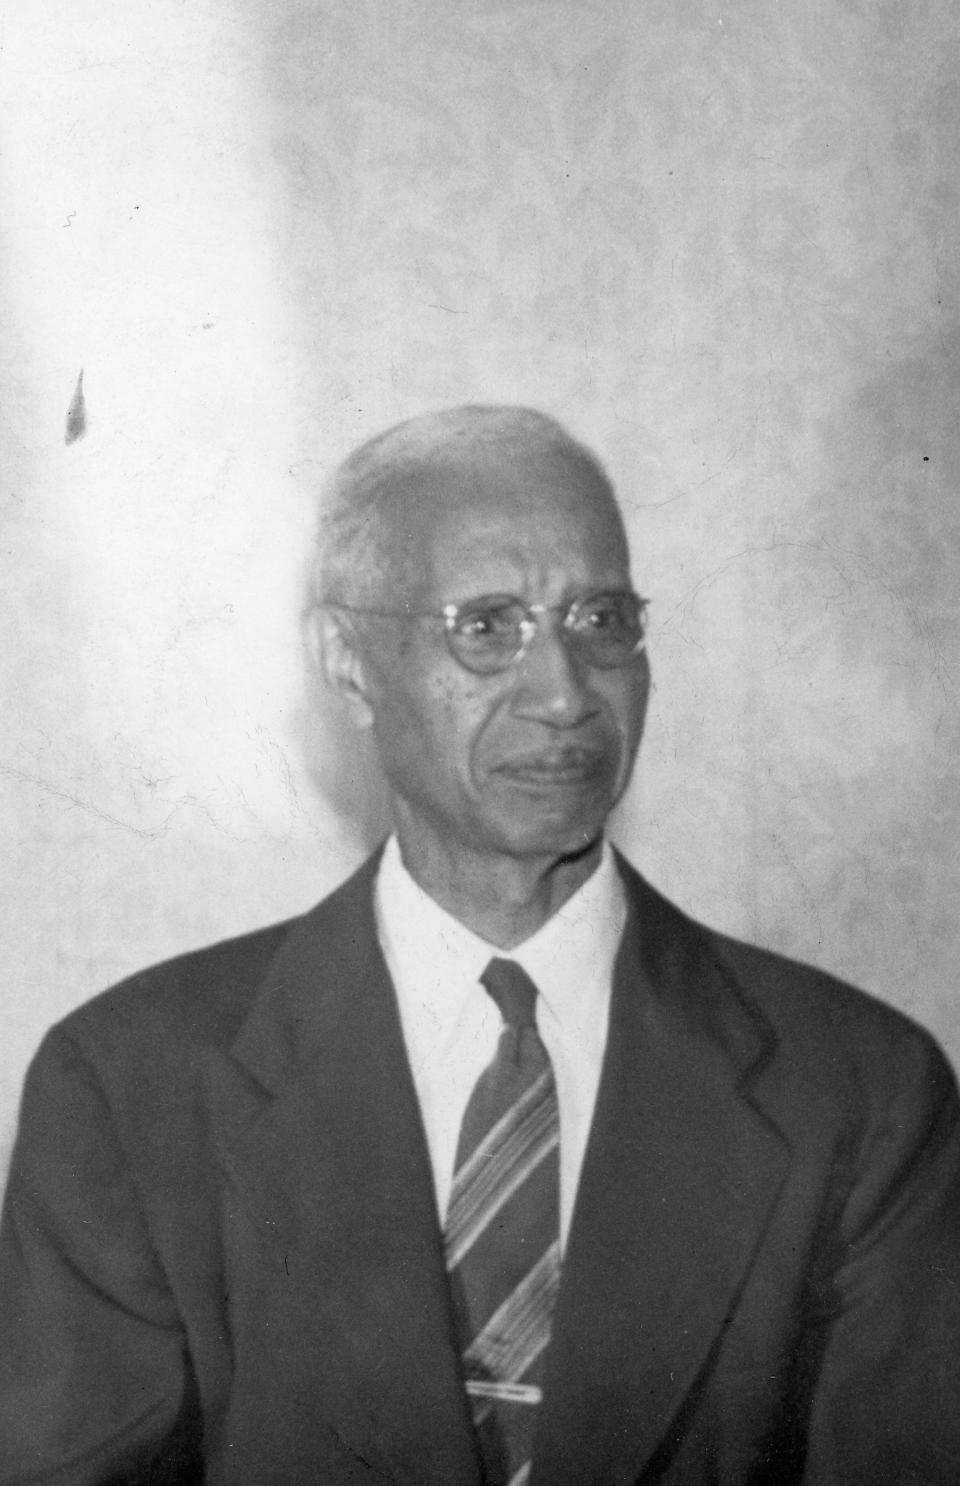 Charles Cansler, pictured in 1943, spoke at the dedication of Beardsley Junior High School in 1936. Cansler, who had recently retired as principal of Green School, would be named interim principal of the new school until 1939.